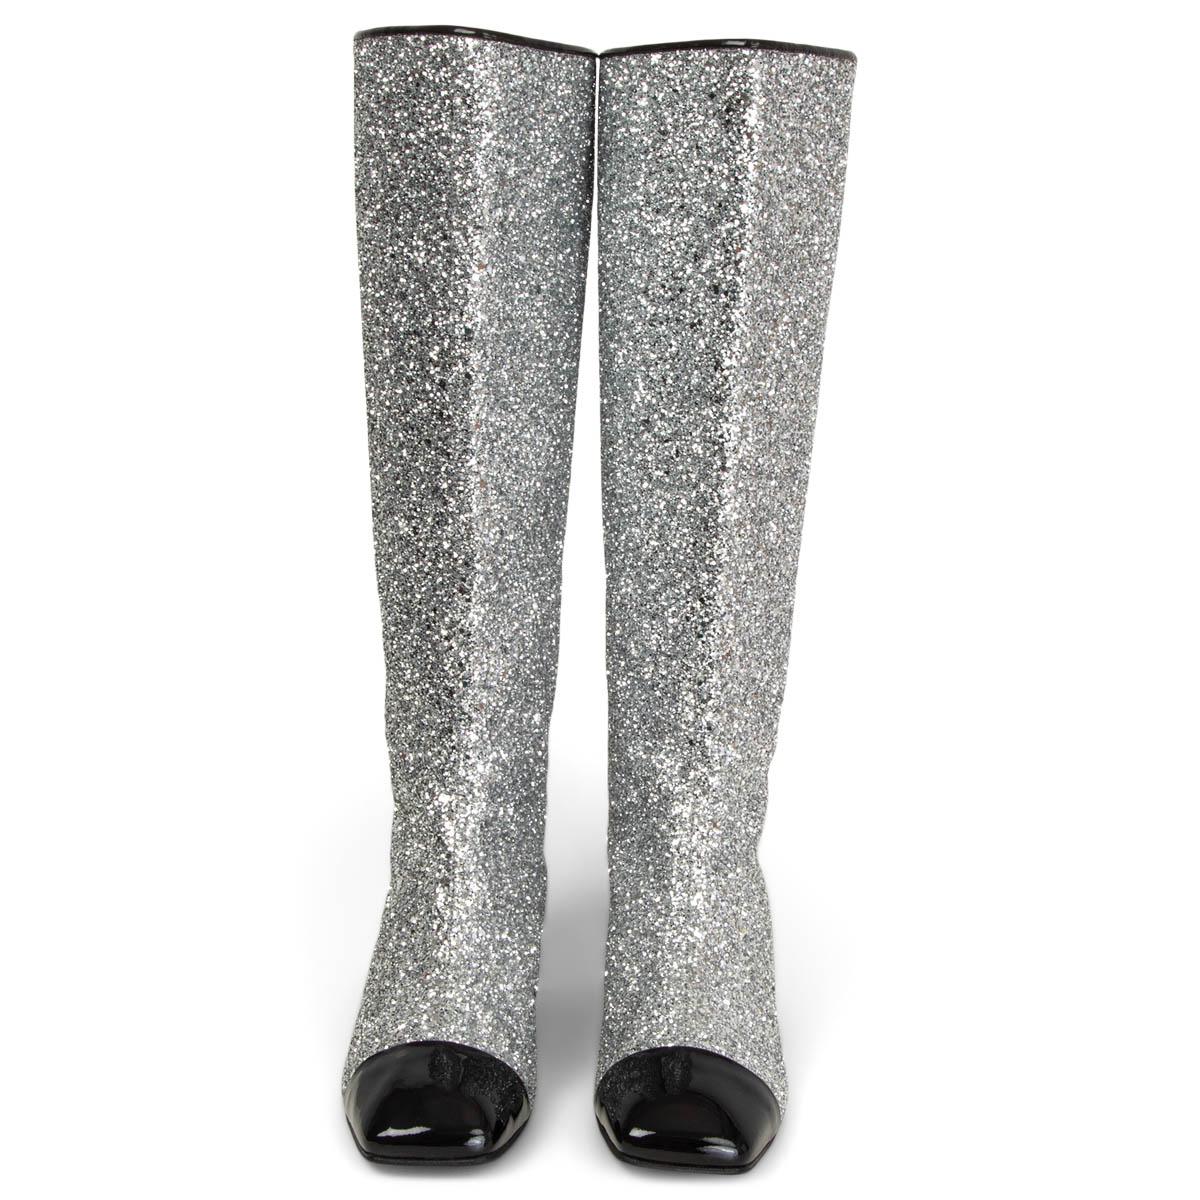 100% authentic Chanel boots in silver glitter featuring a black patent leather block heel and square cap toes. They have been adorned with the iconic CC logo at the top and come equipped with comfortable leather-lined insoles. Brand new. Rubber sole